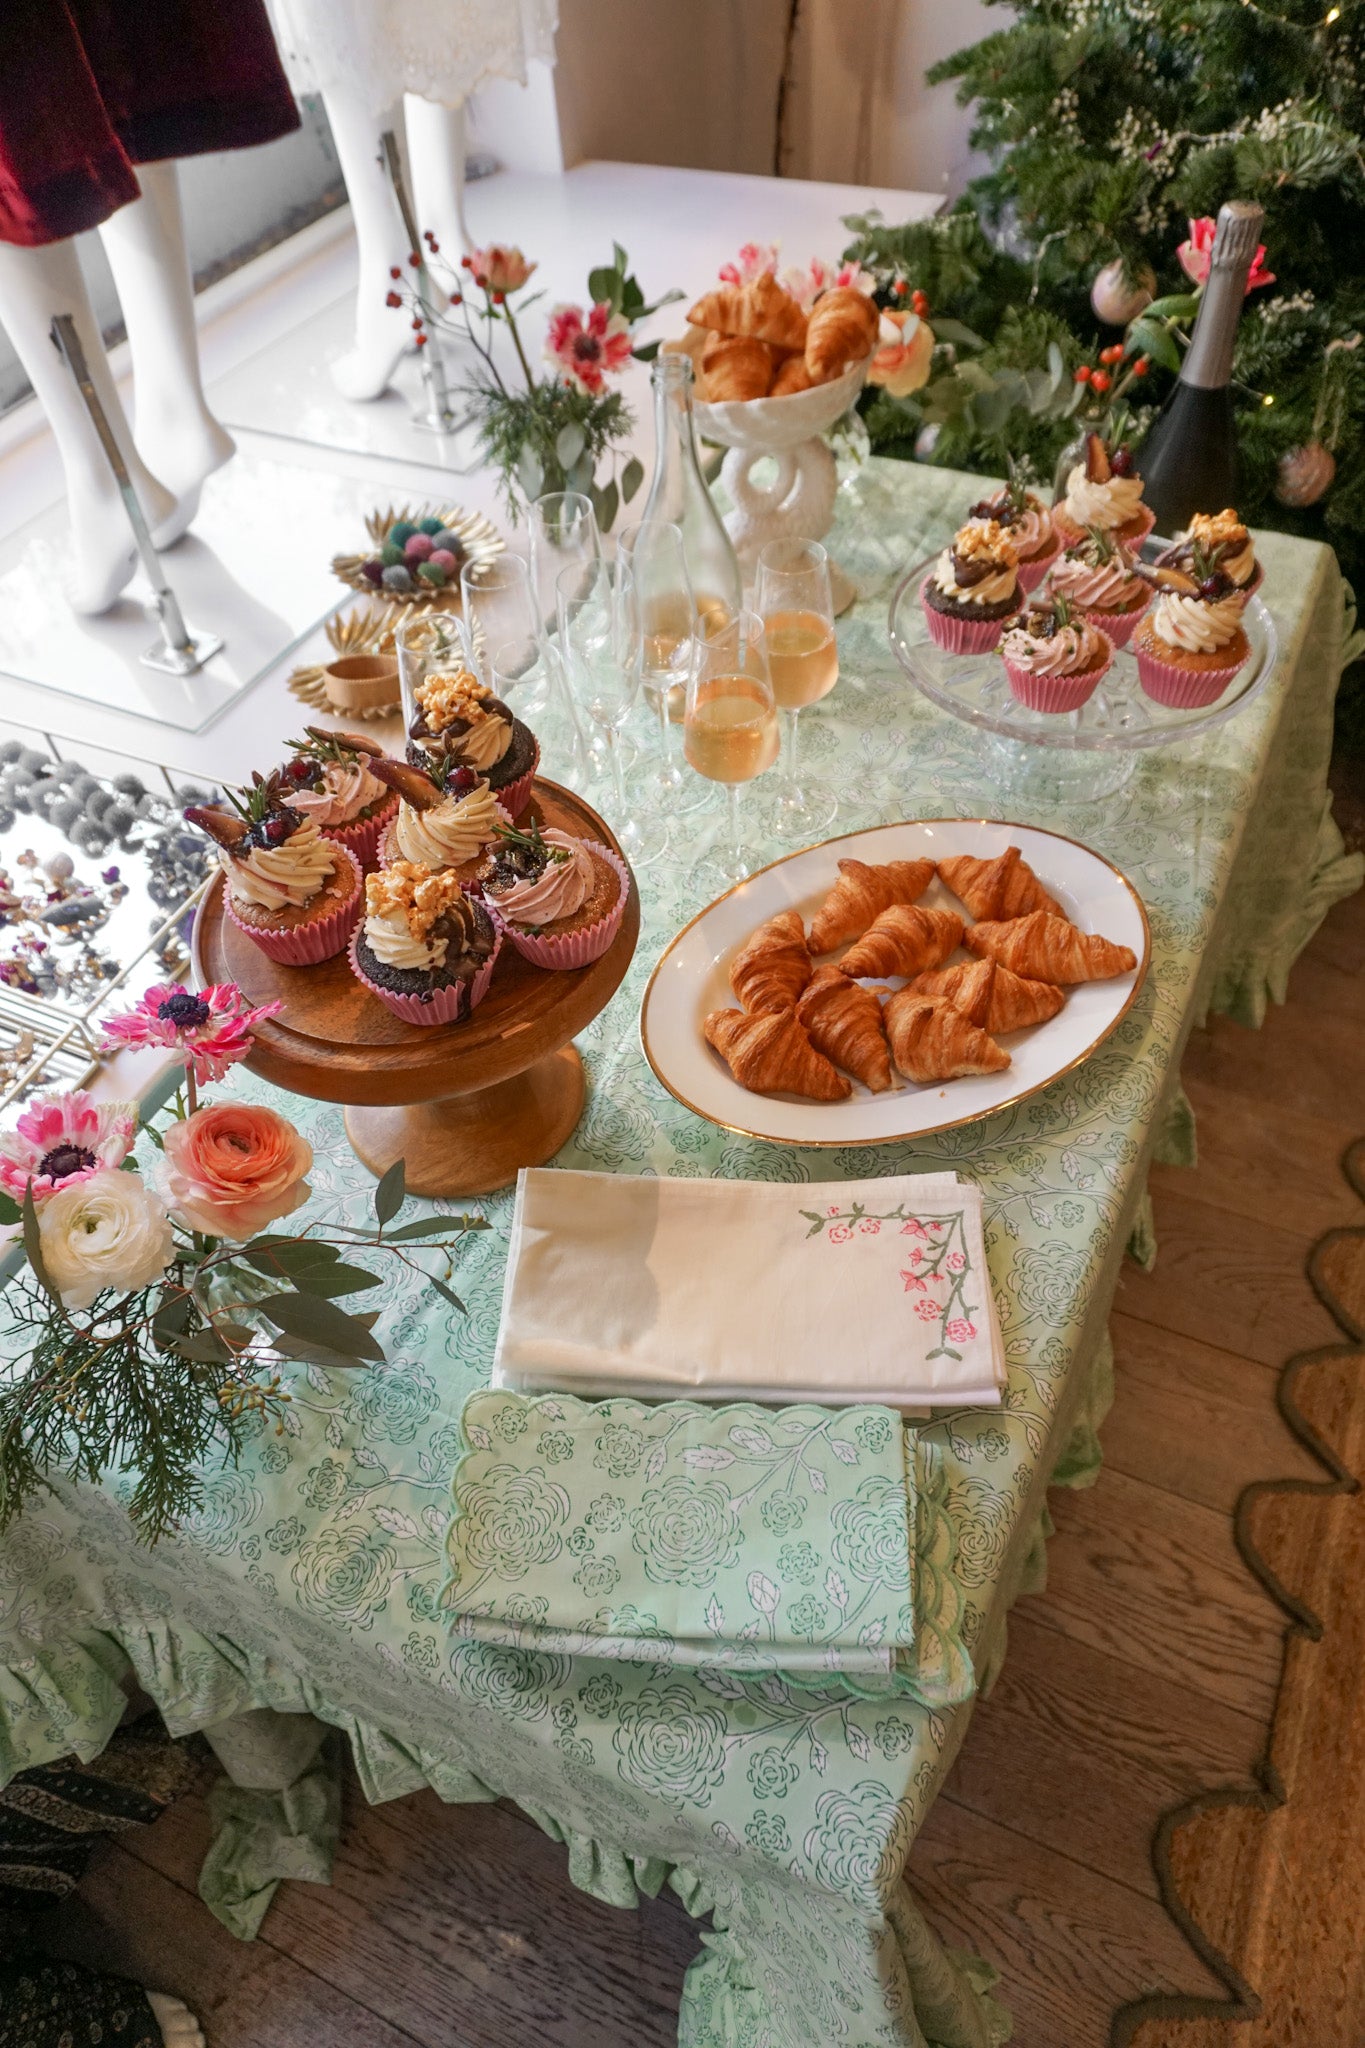 Tablescape with croissants and cupcakes